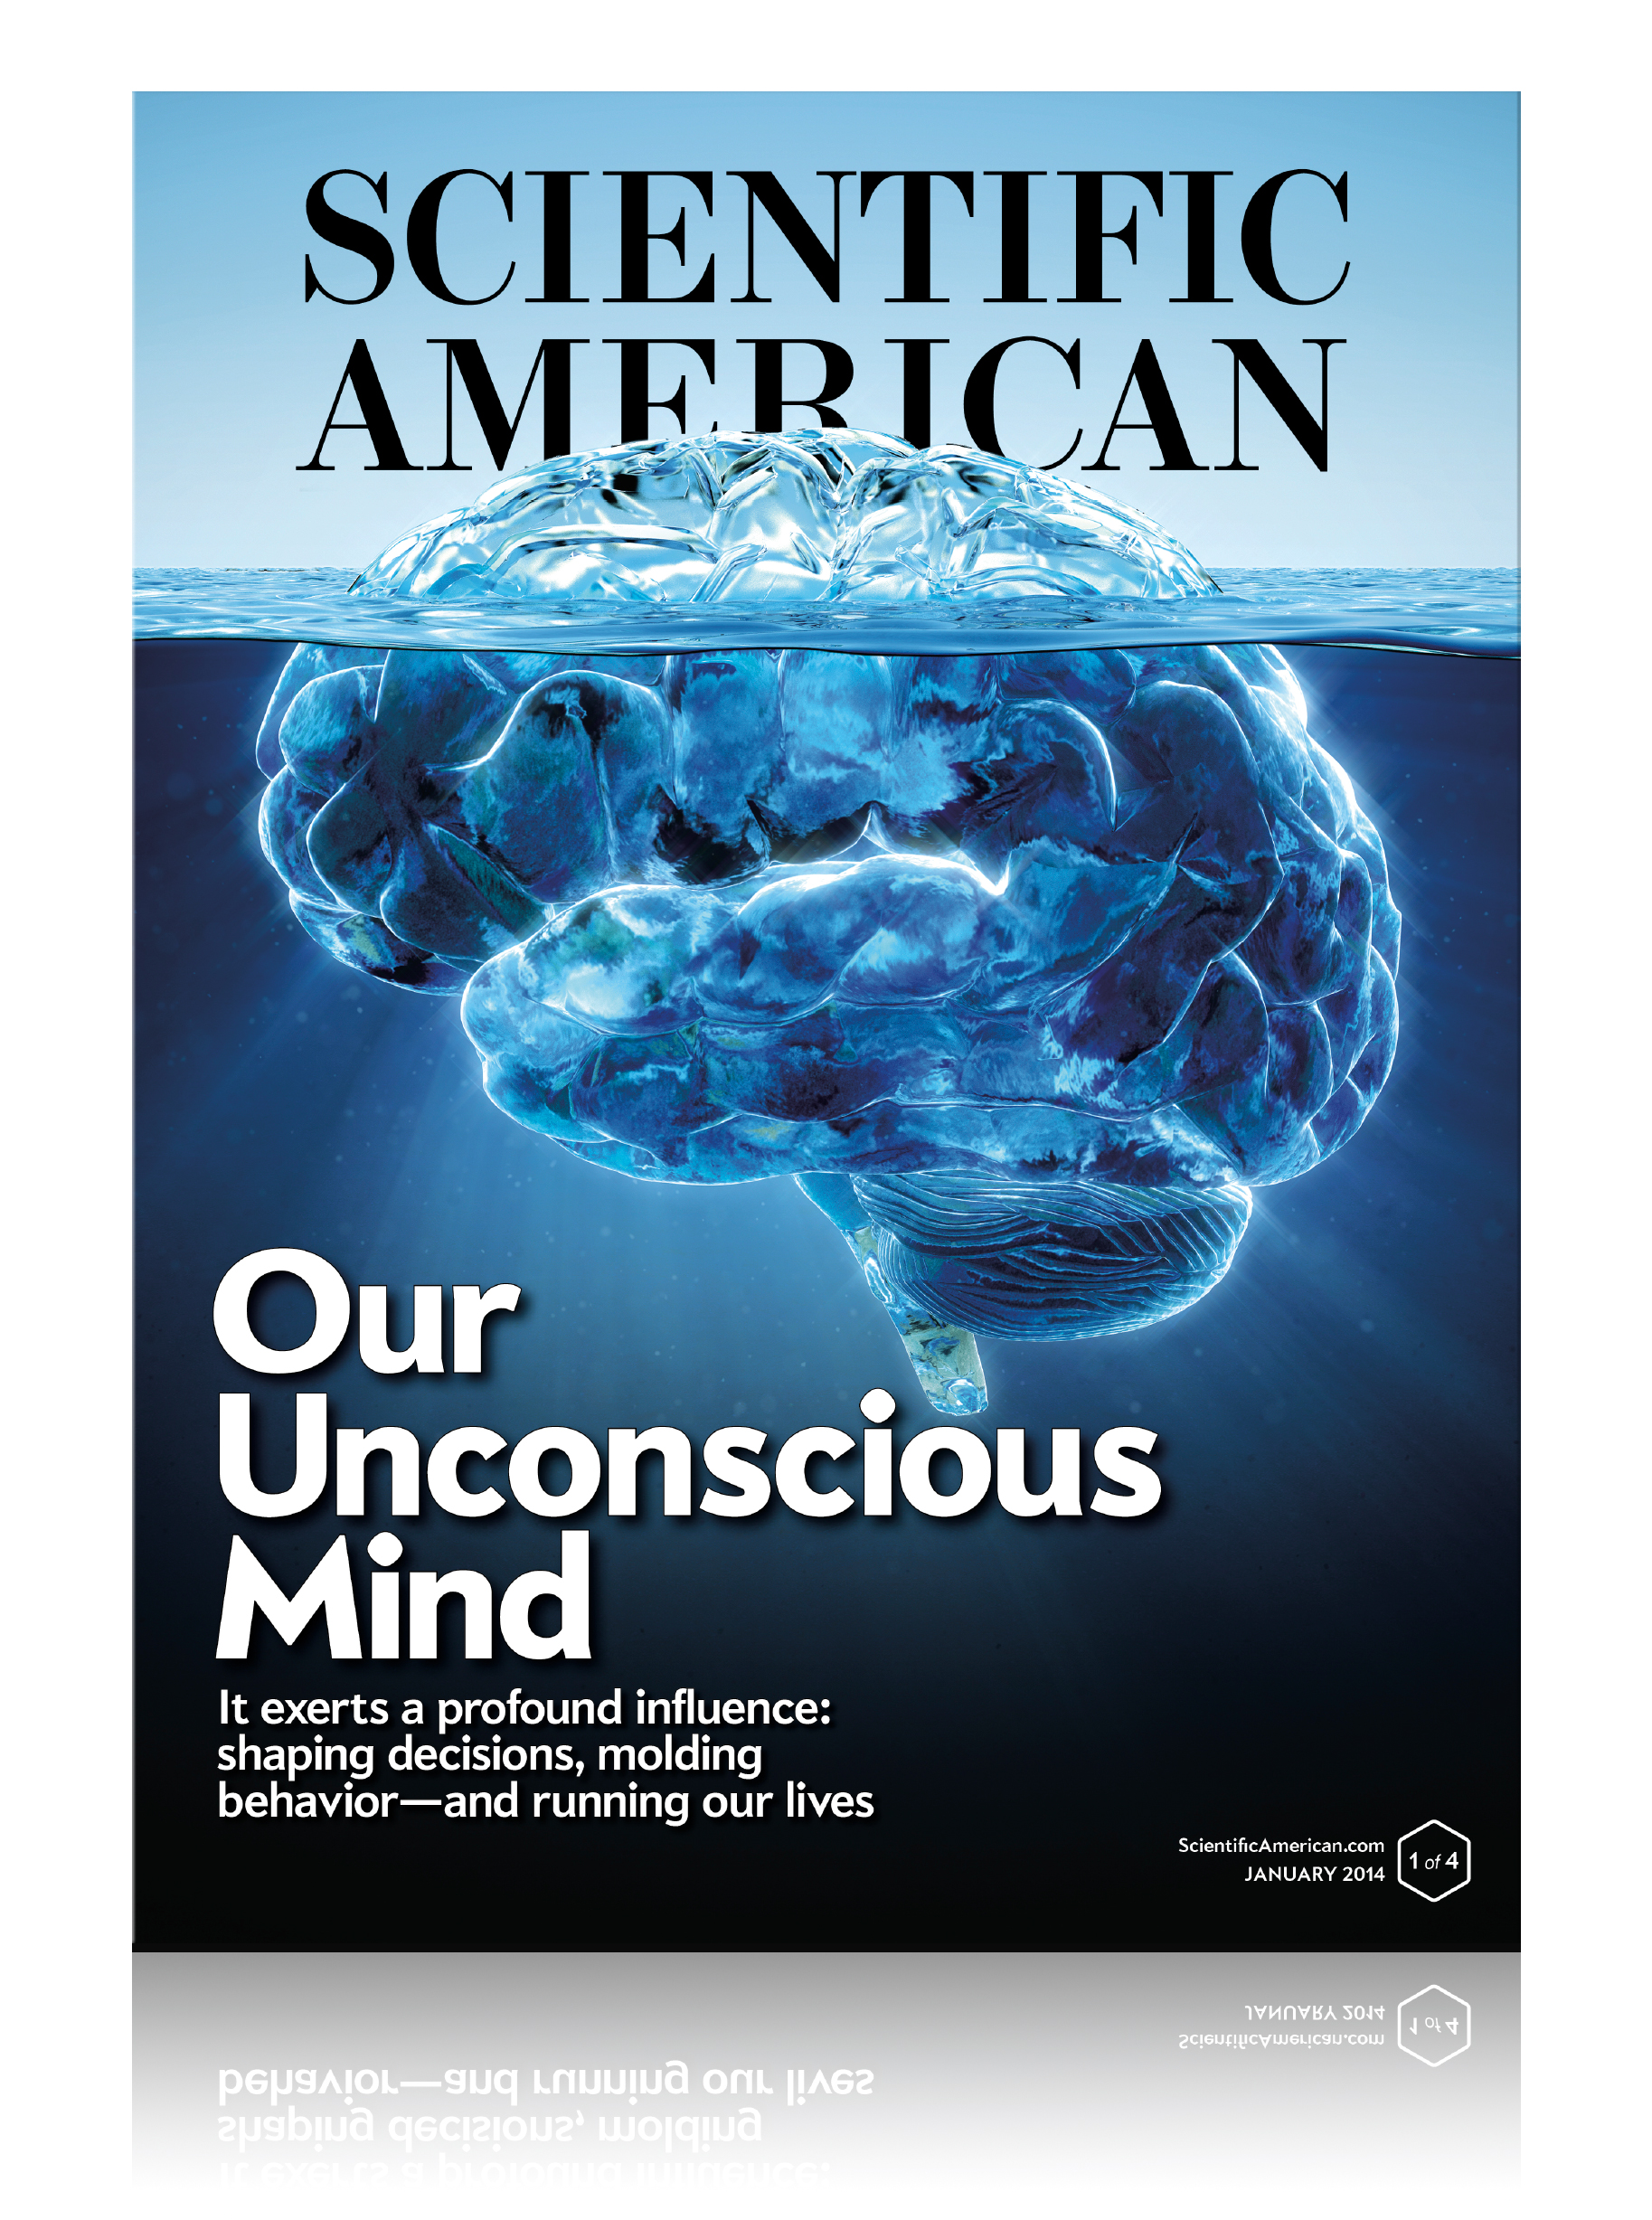 Science in our lives. Scientific American журнал. Американские научные журналы. «Scientific American» обложка. Научный журнал в Америке.